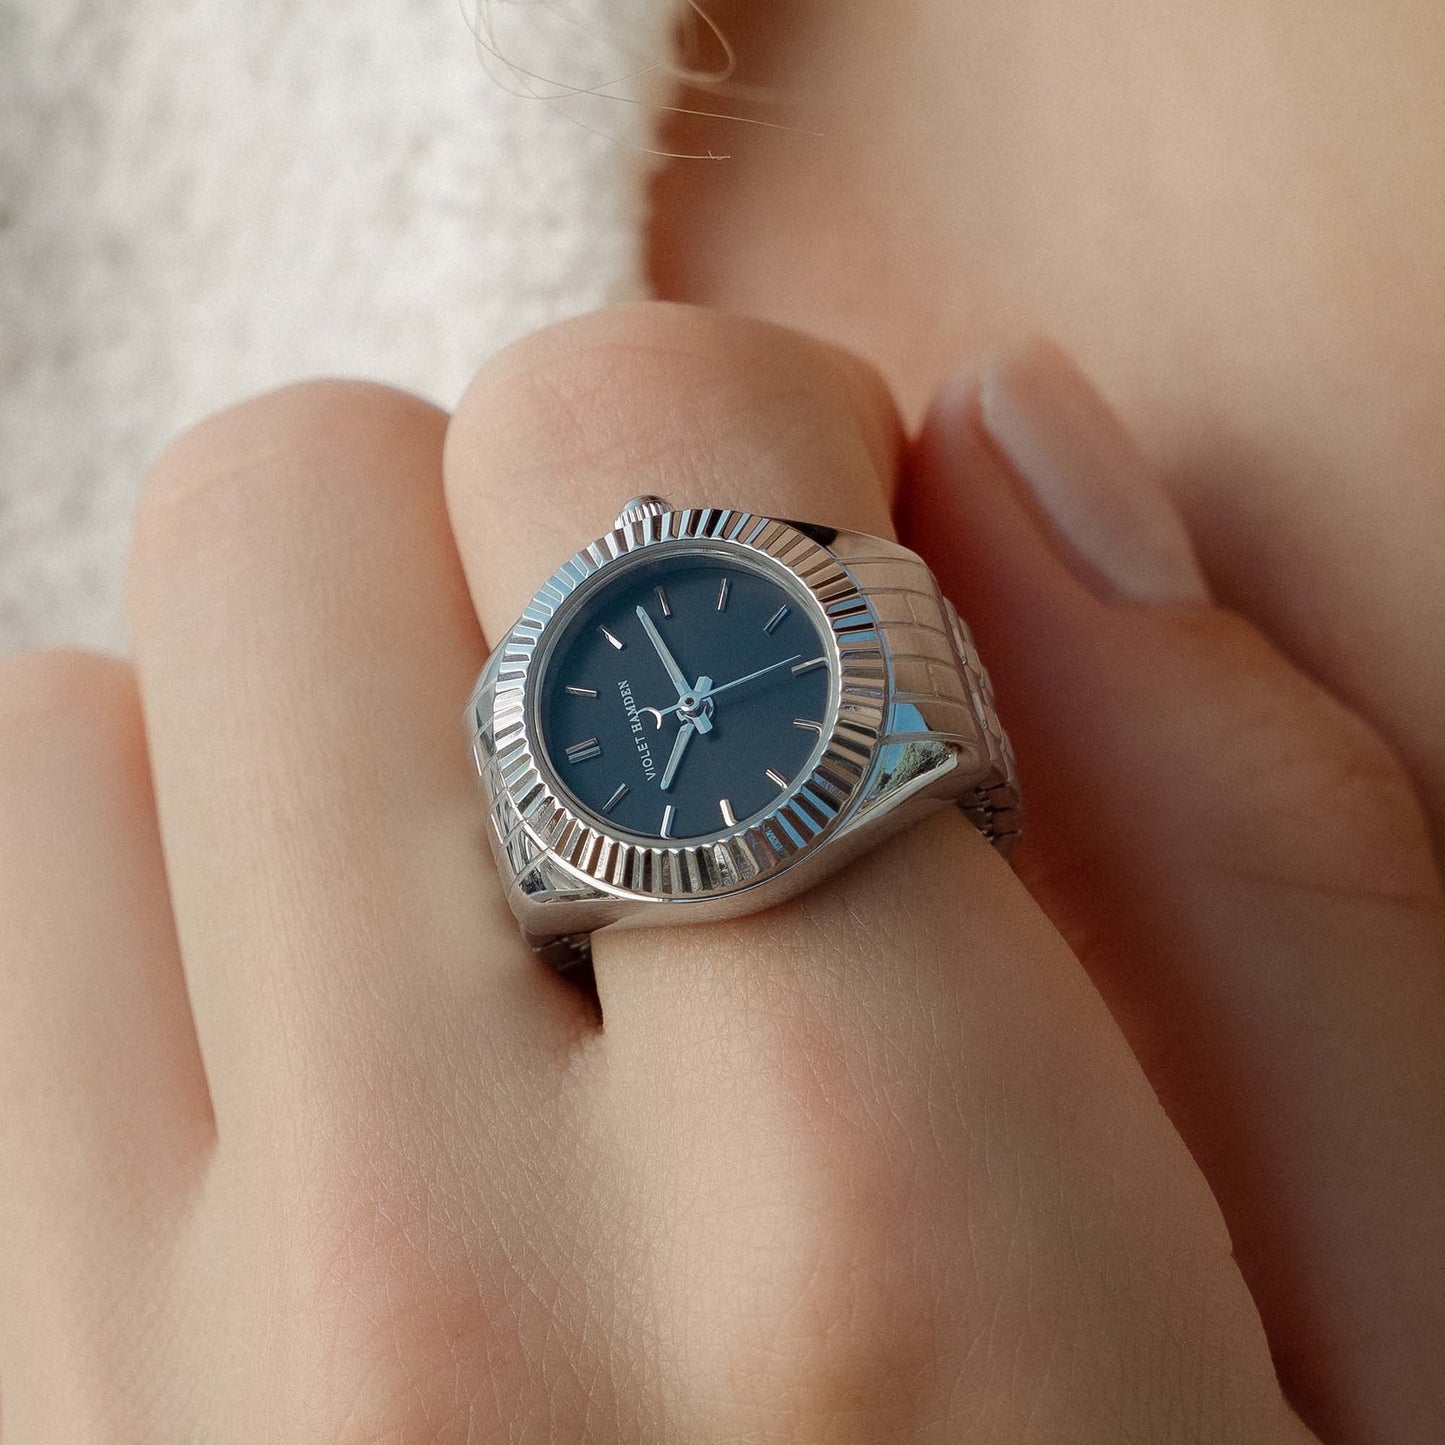 Sunrise silver coloured ring watch